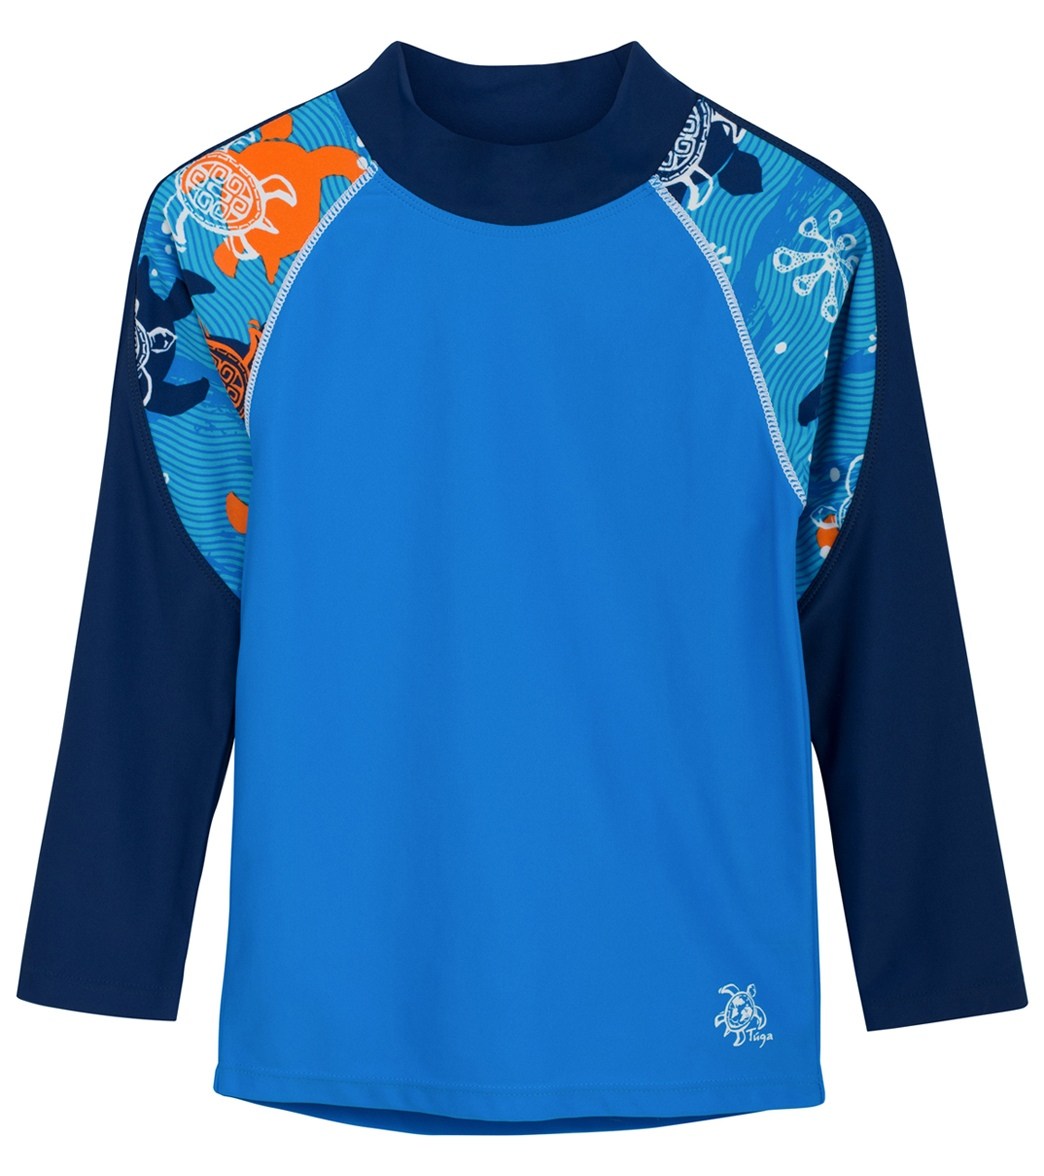 Tuga Boys' Offshore Long Sleeve Rash Guard Toddler/Little/Big Kid - Blue Roller 11/12 Yrs Size Years - Swimoutlet.com